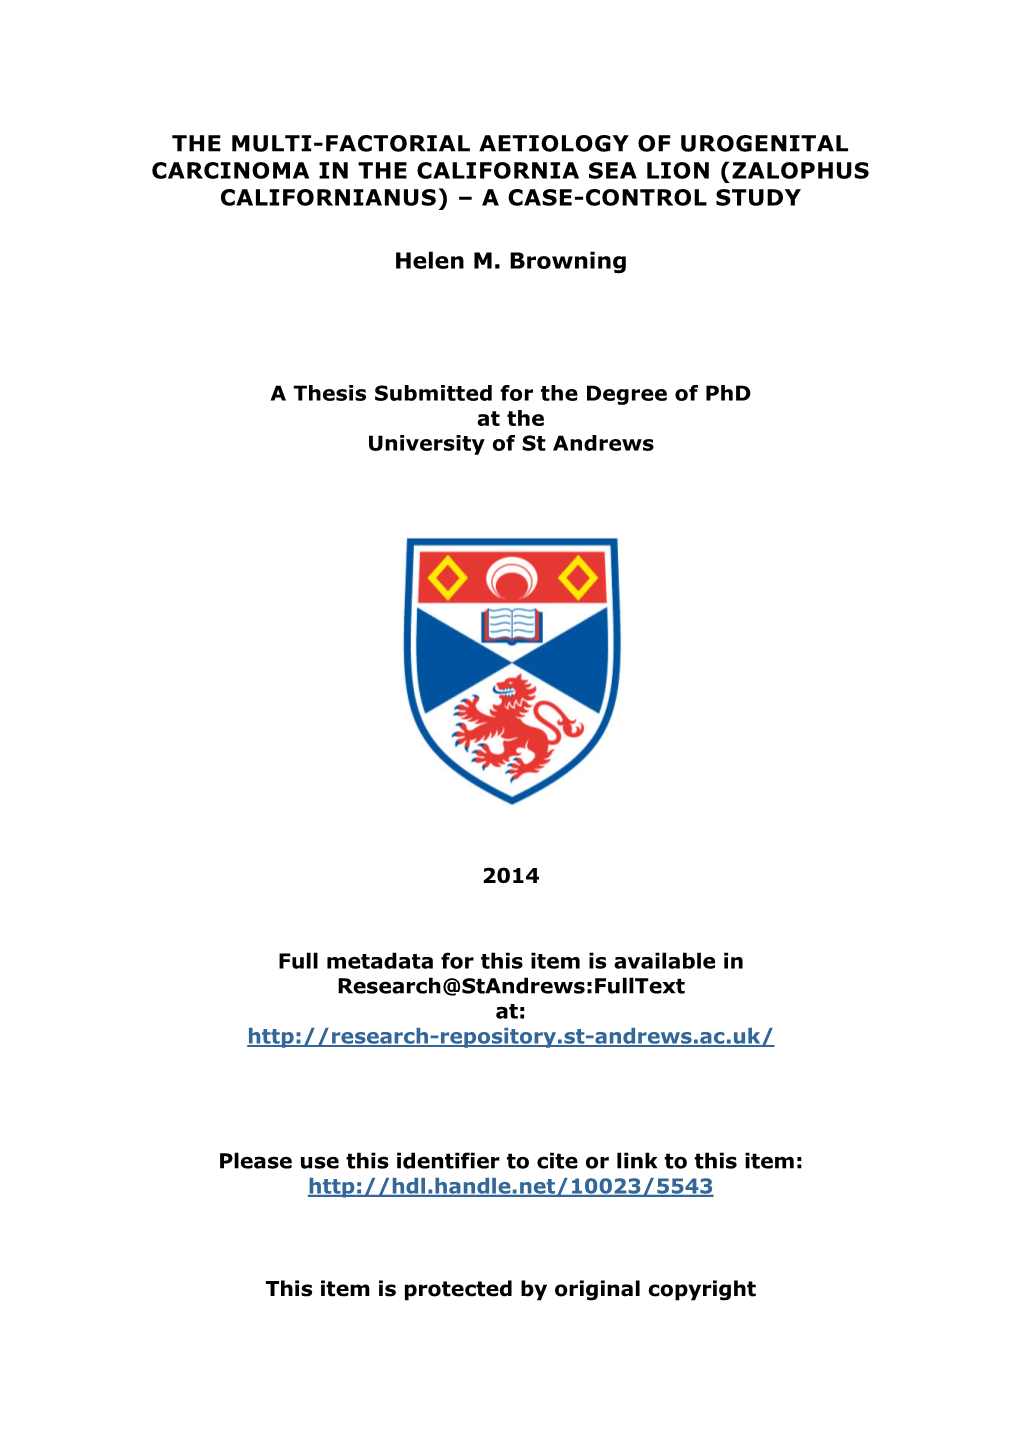 Helen M. Browning Phd Thesis